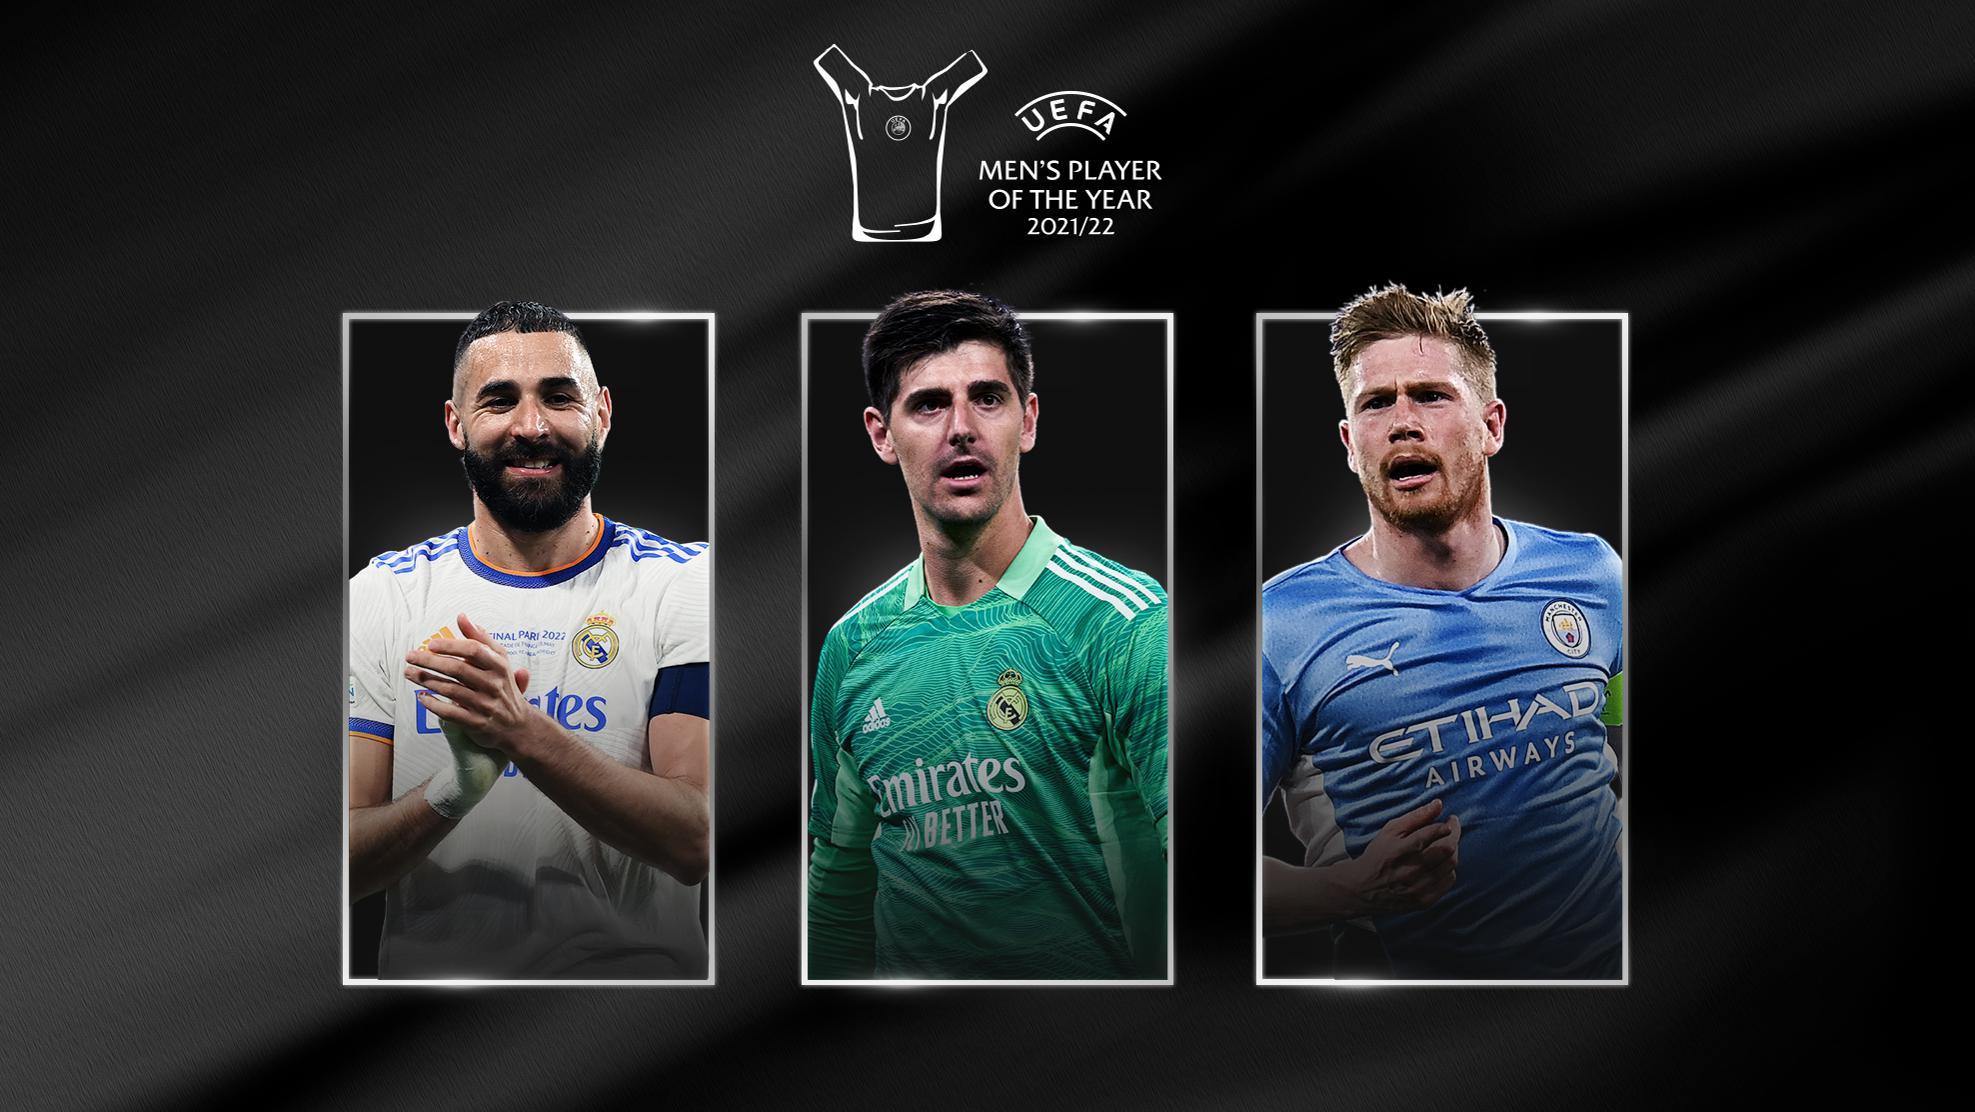 UEFA Men's Player of the Year nominees: Benzema, Courtois, De Bruyne - Inside UEFA